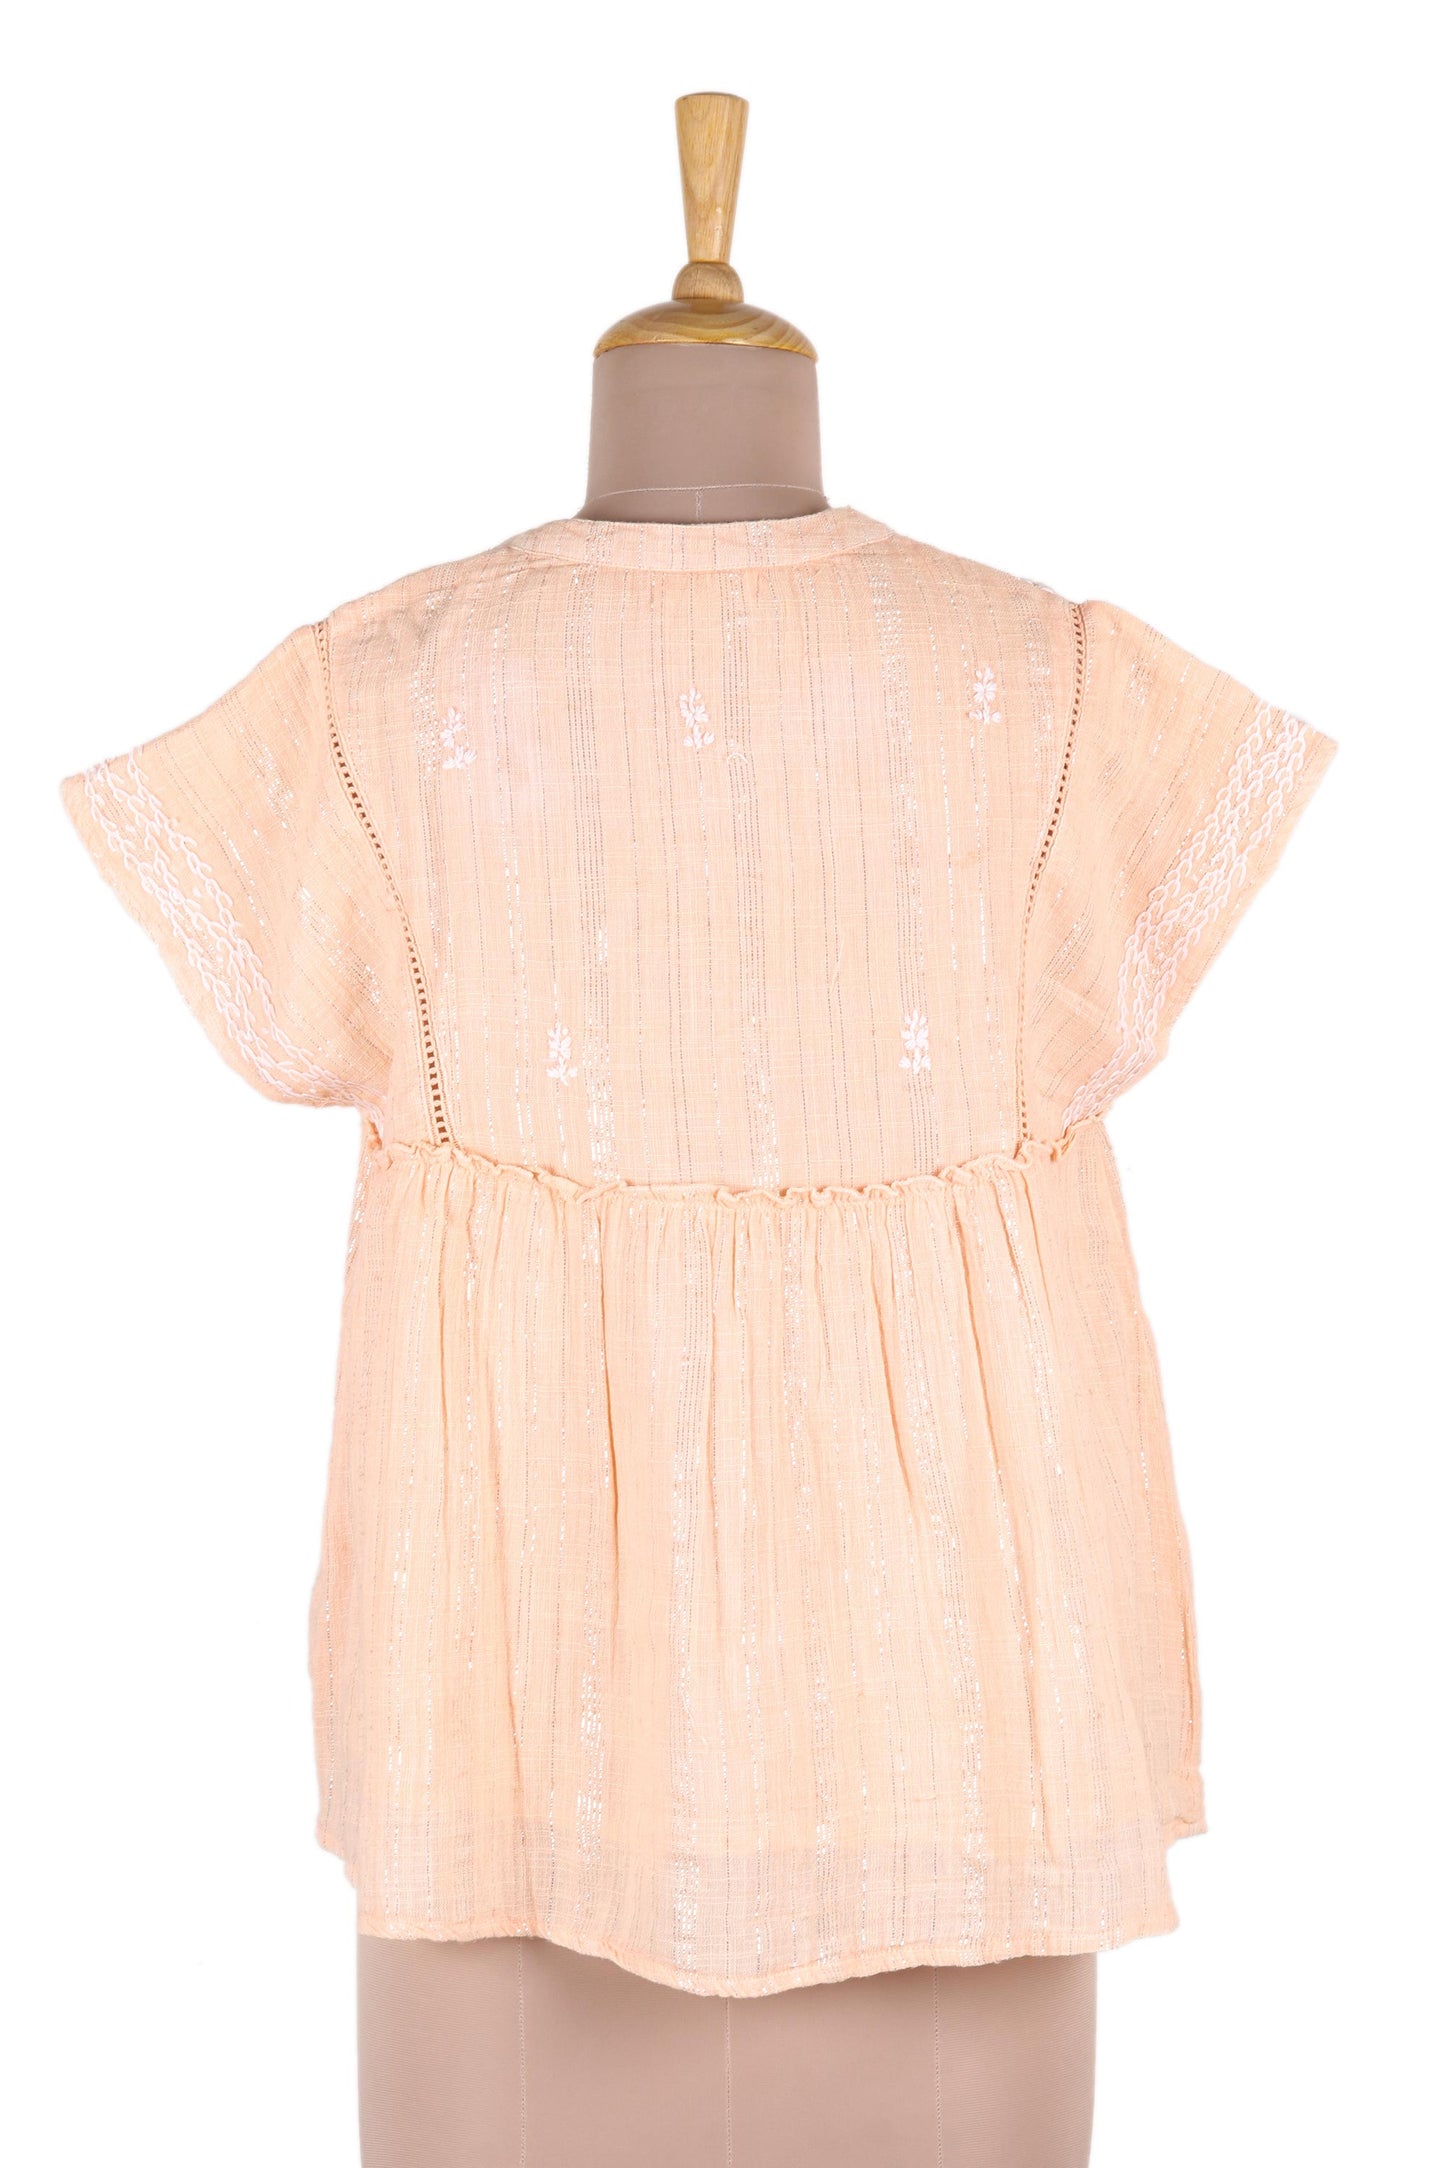 Peach Glory Embroidered Cotton Blend Blouse in Peach from India